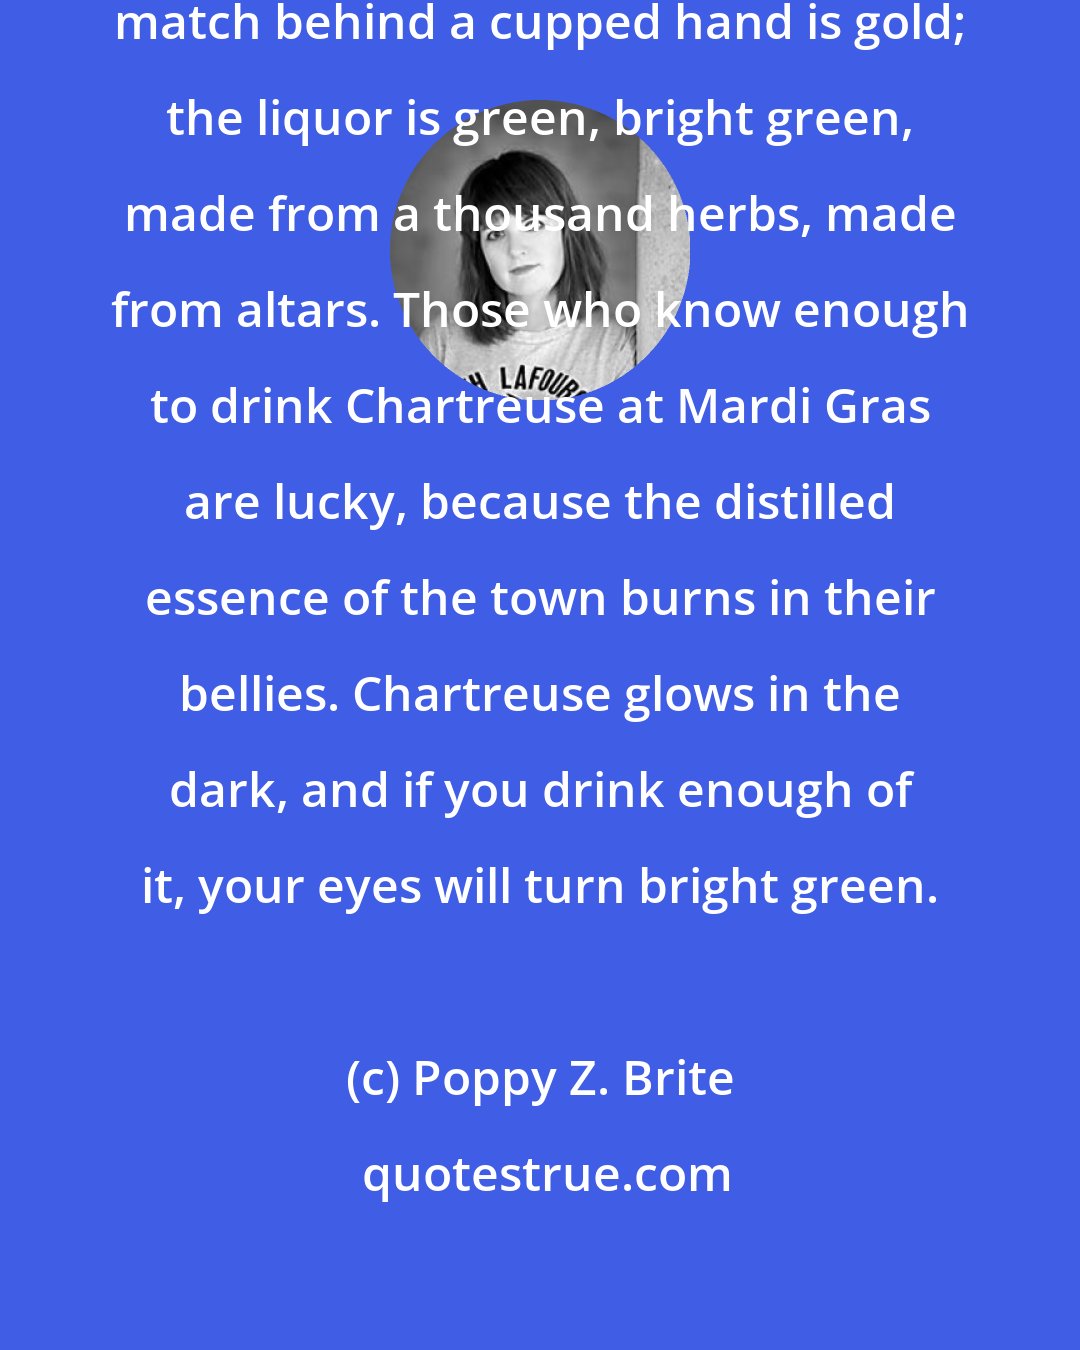 Poppy Z. Brite: The sky is purple, the flare of a match behind a cupped hand is gold; the liquor is green, bright green, made from a thousand herbs, made from altars. Those who know enough to drink Chartreuse at Mardi Gras are lucky, because the distilled essence of the town burns in their bellies. Chartreuse glows in the dark, and if you drink enough of it, your eyes will turn bright green.